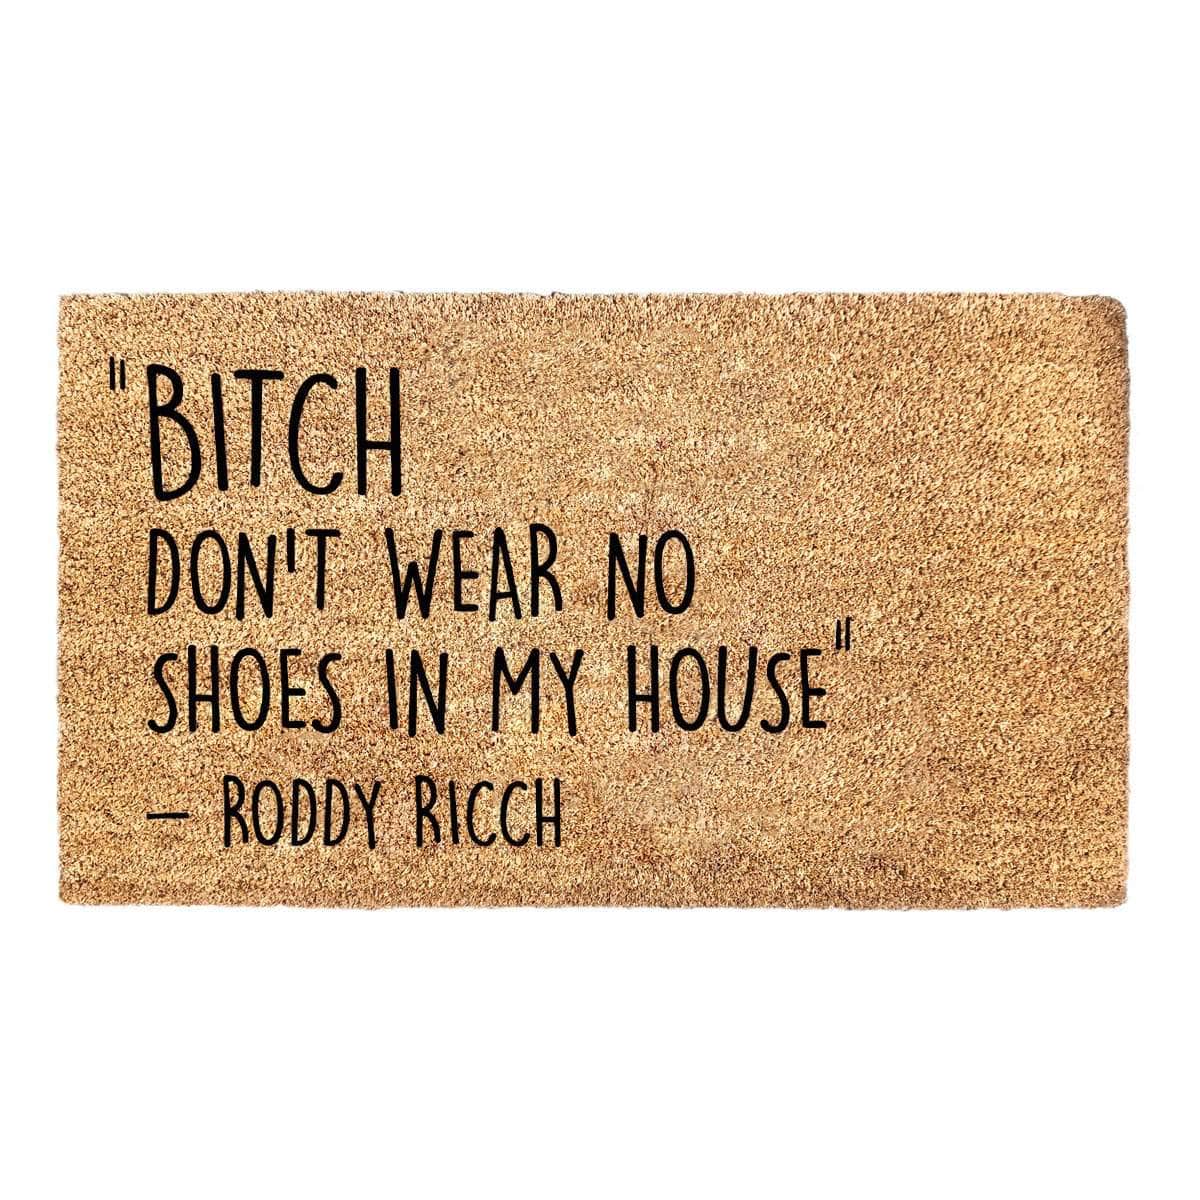 Bitch Don't Wear No Shoes In My House - Roddy Ricch Doormat